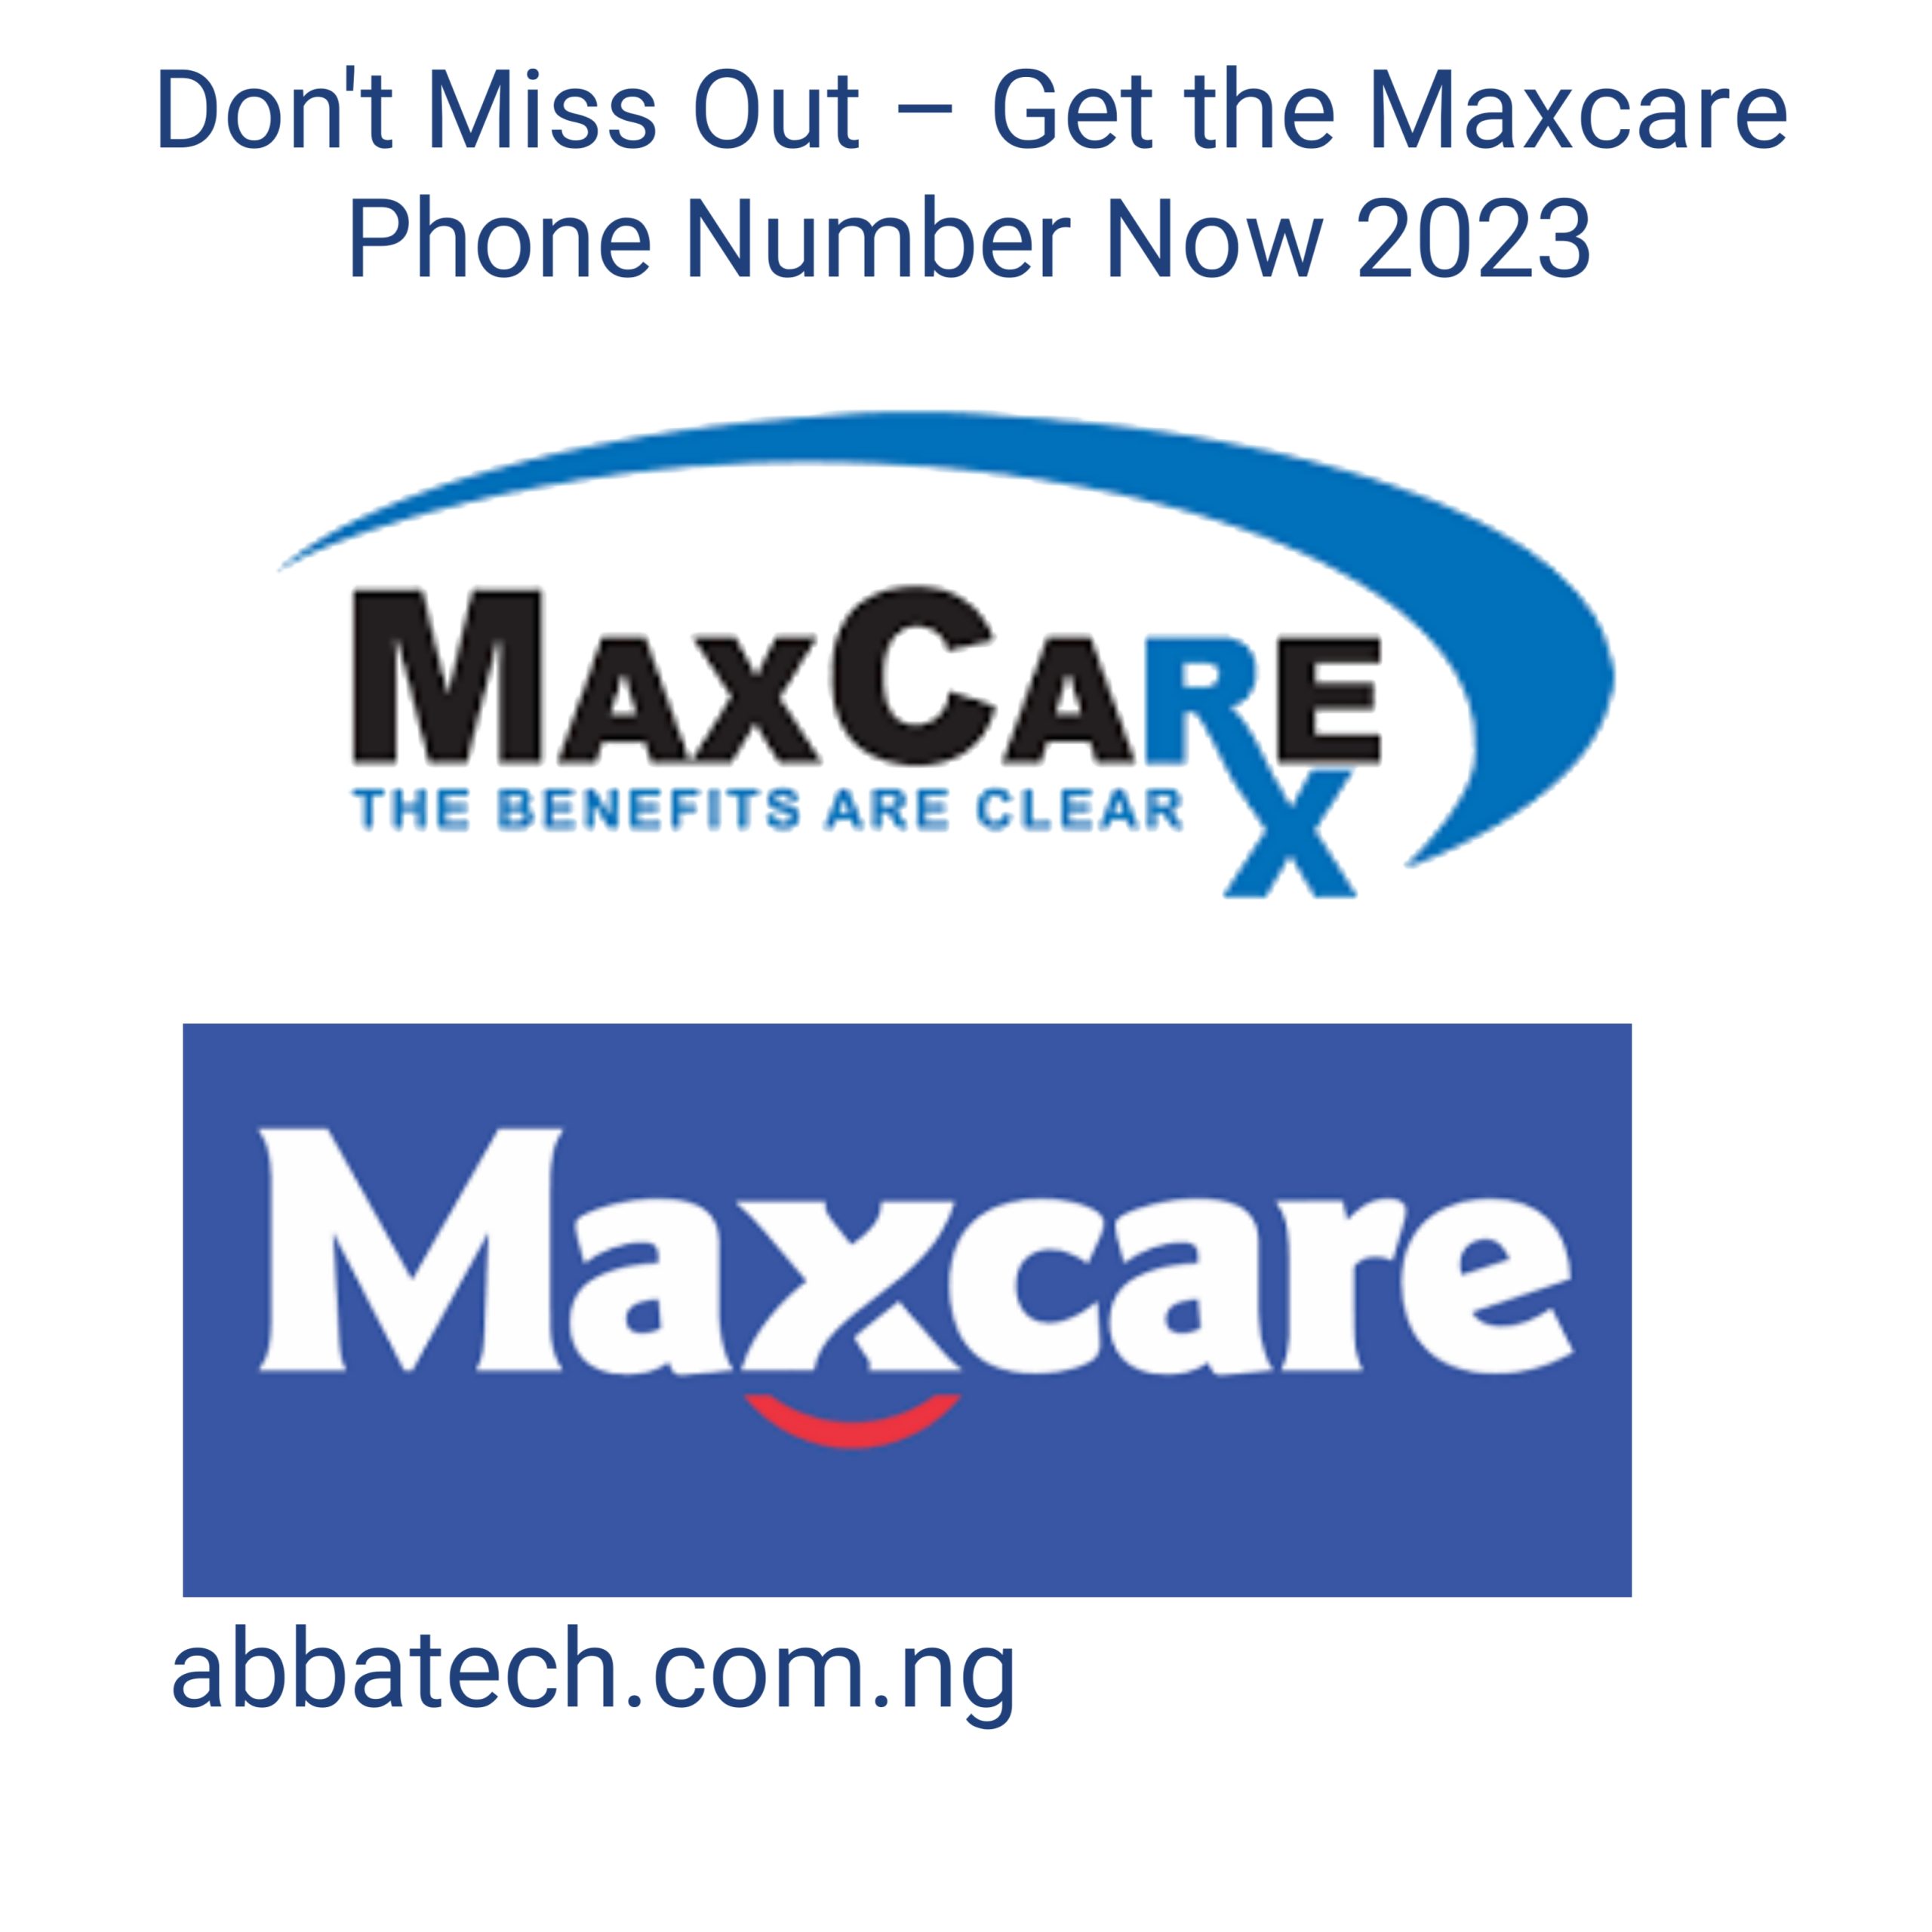 Don't Miss Out – Get the Maxcare Phone Number Now 2023